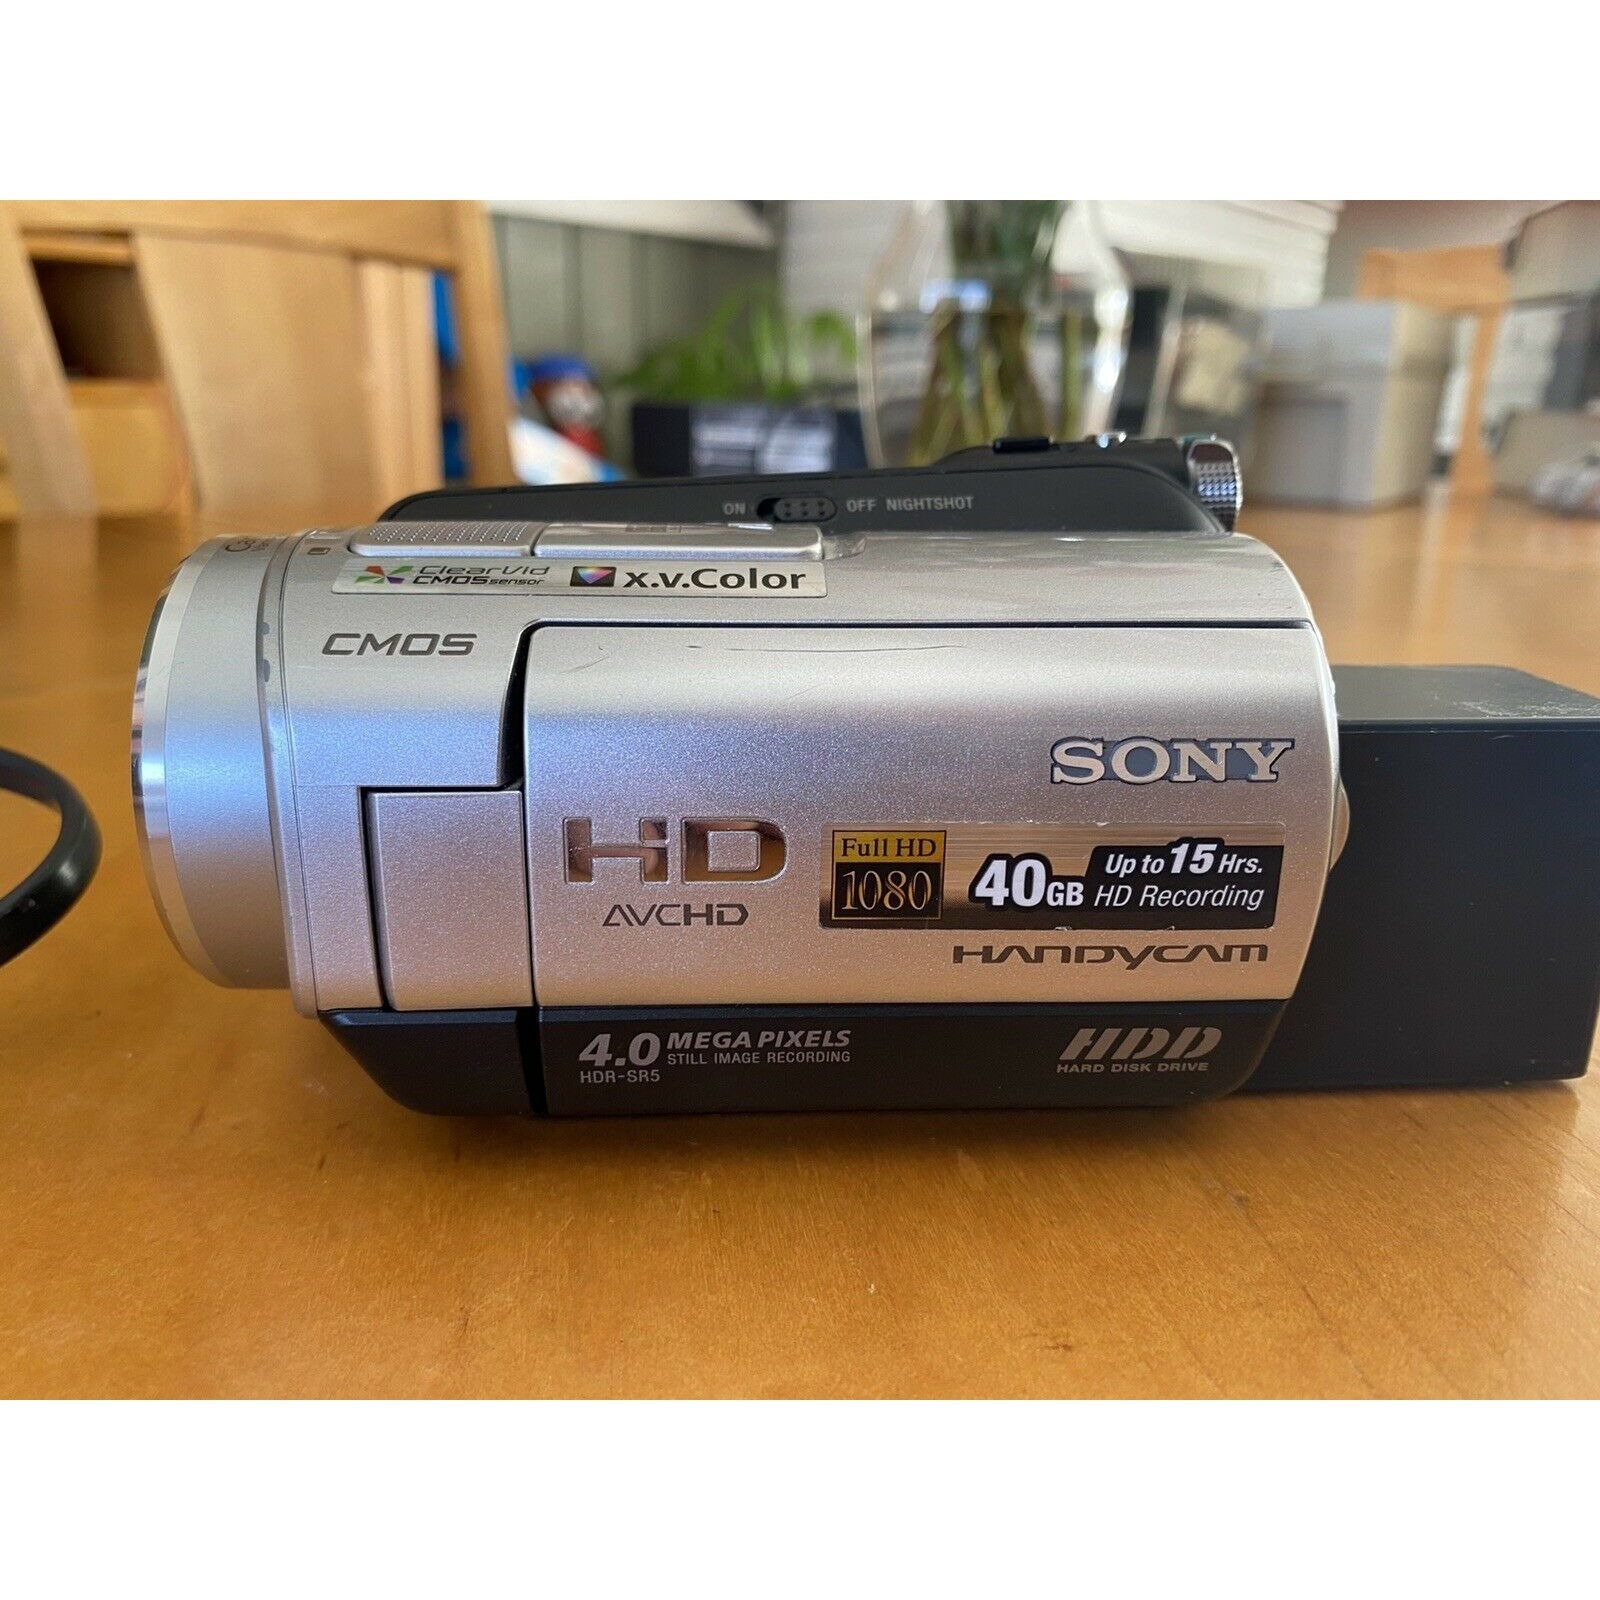 Precious fluctuate delay Sony HDR-SR5 Handycam Camcorder HDD Full 1080 - Etsy